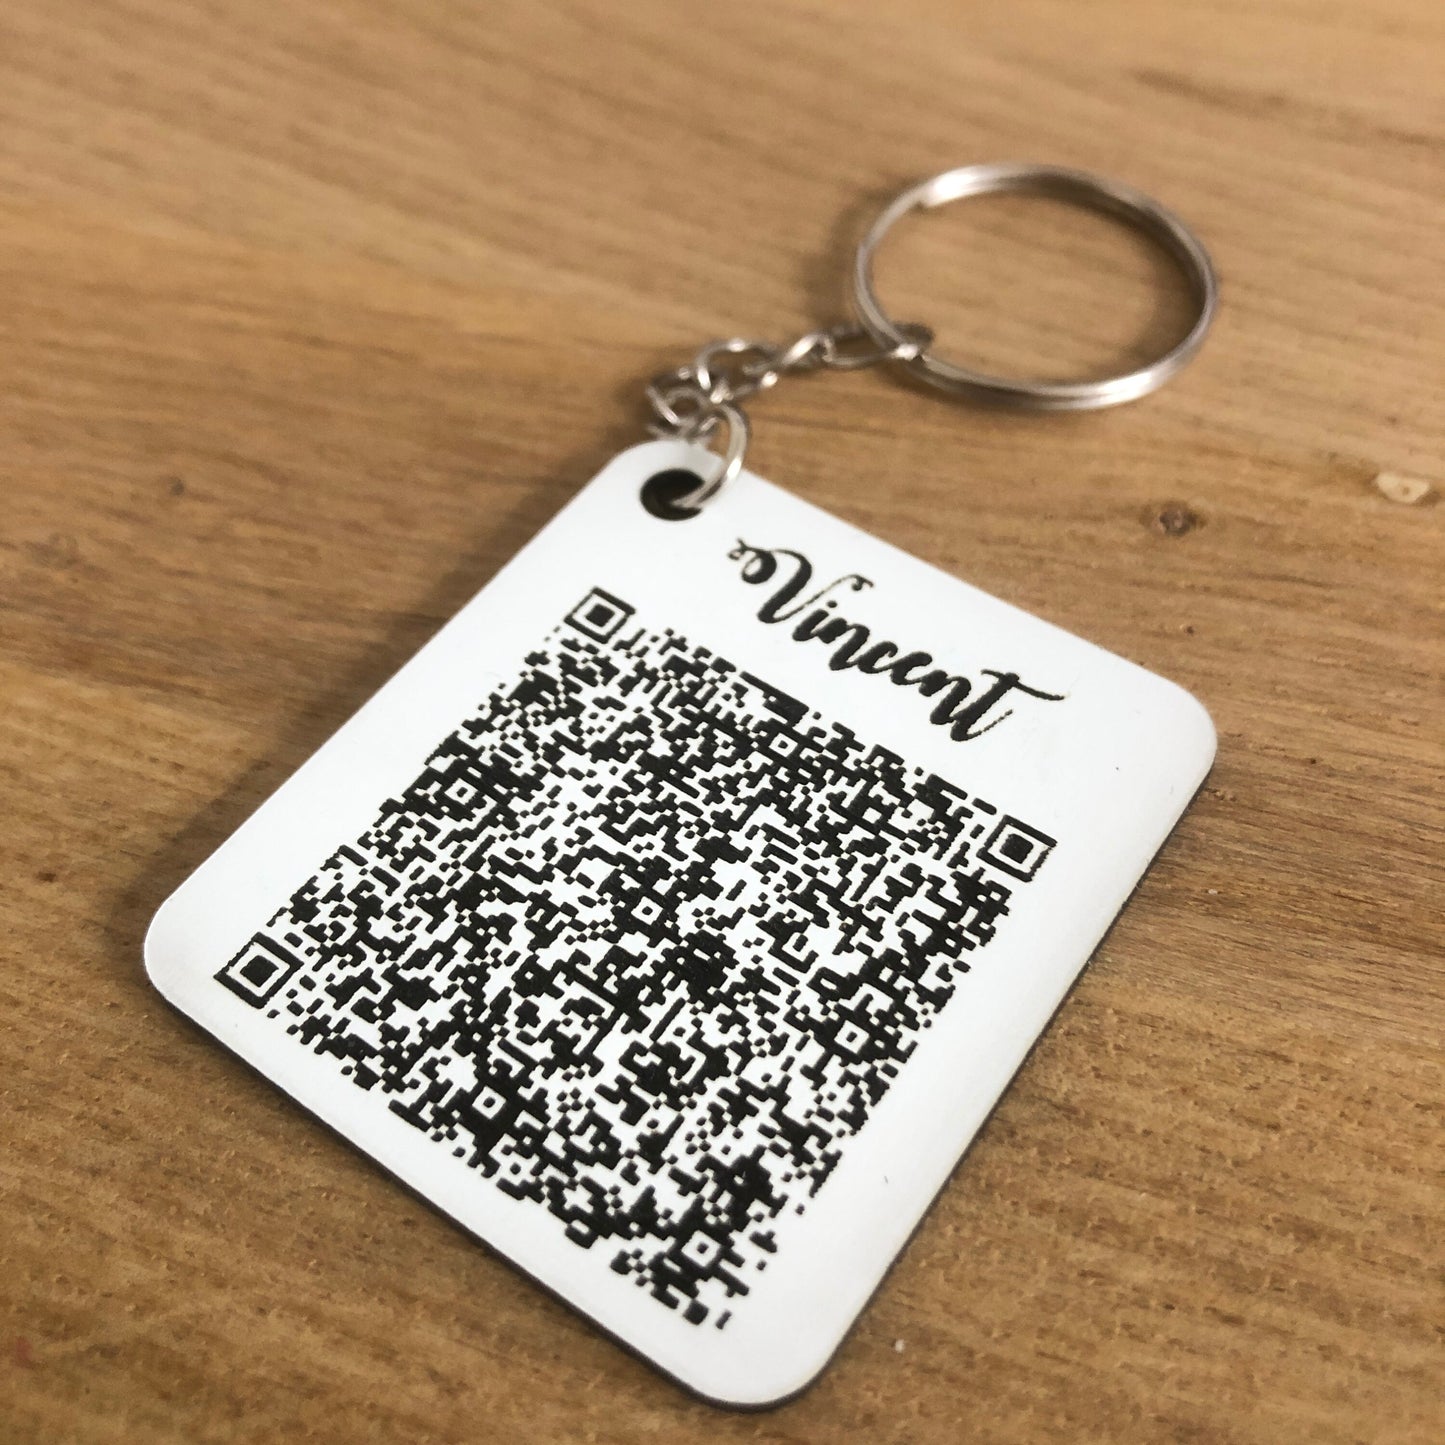 Personalized QR CODE keychain